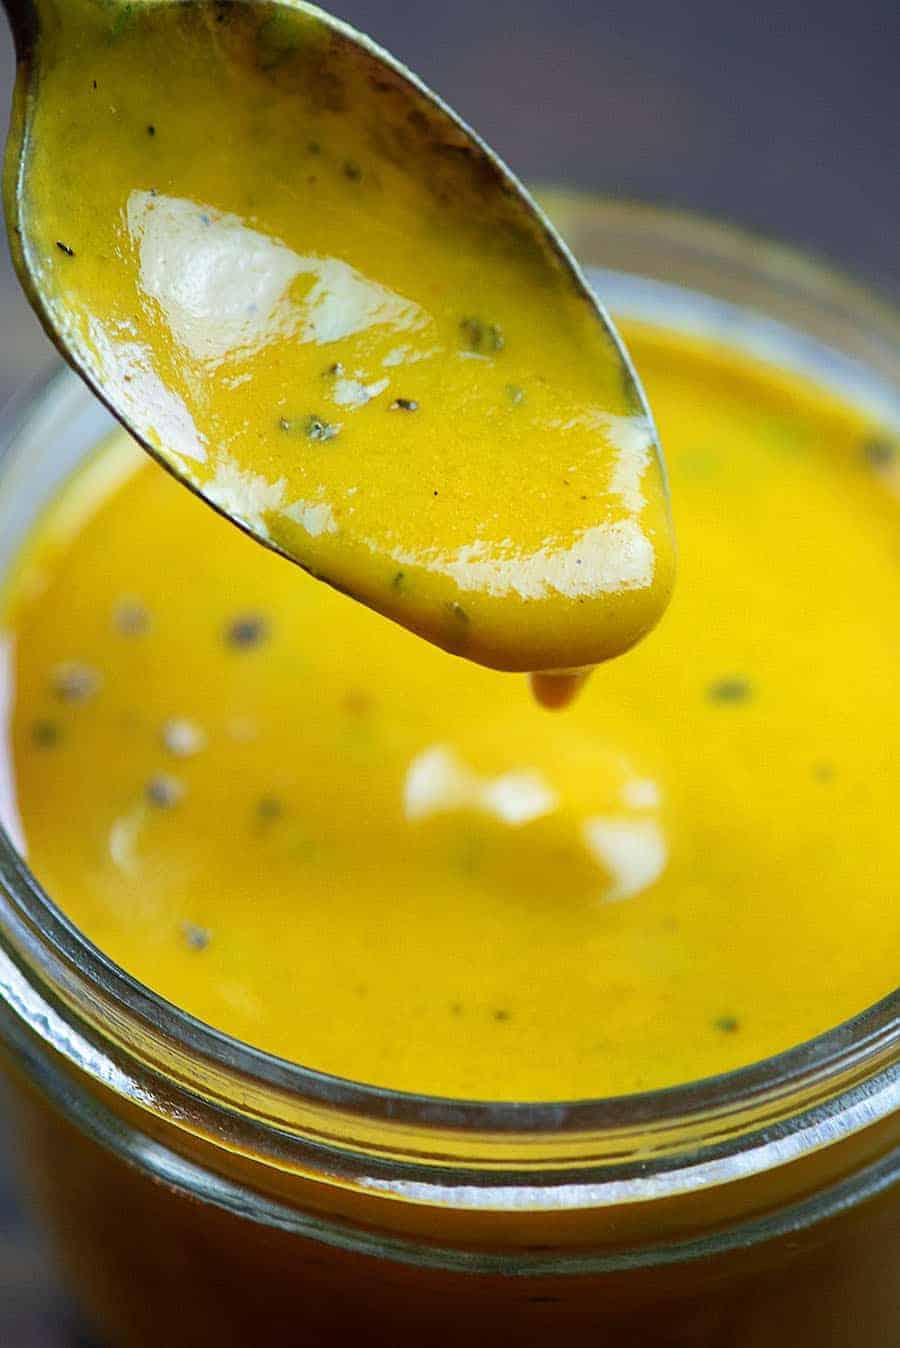 Spoon dripping sauce into a jar